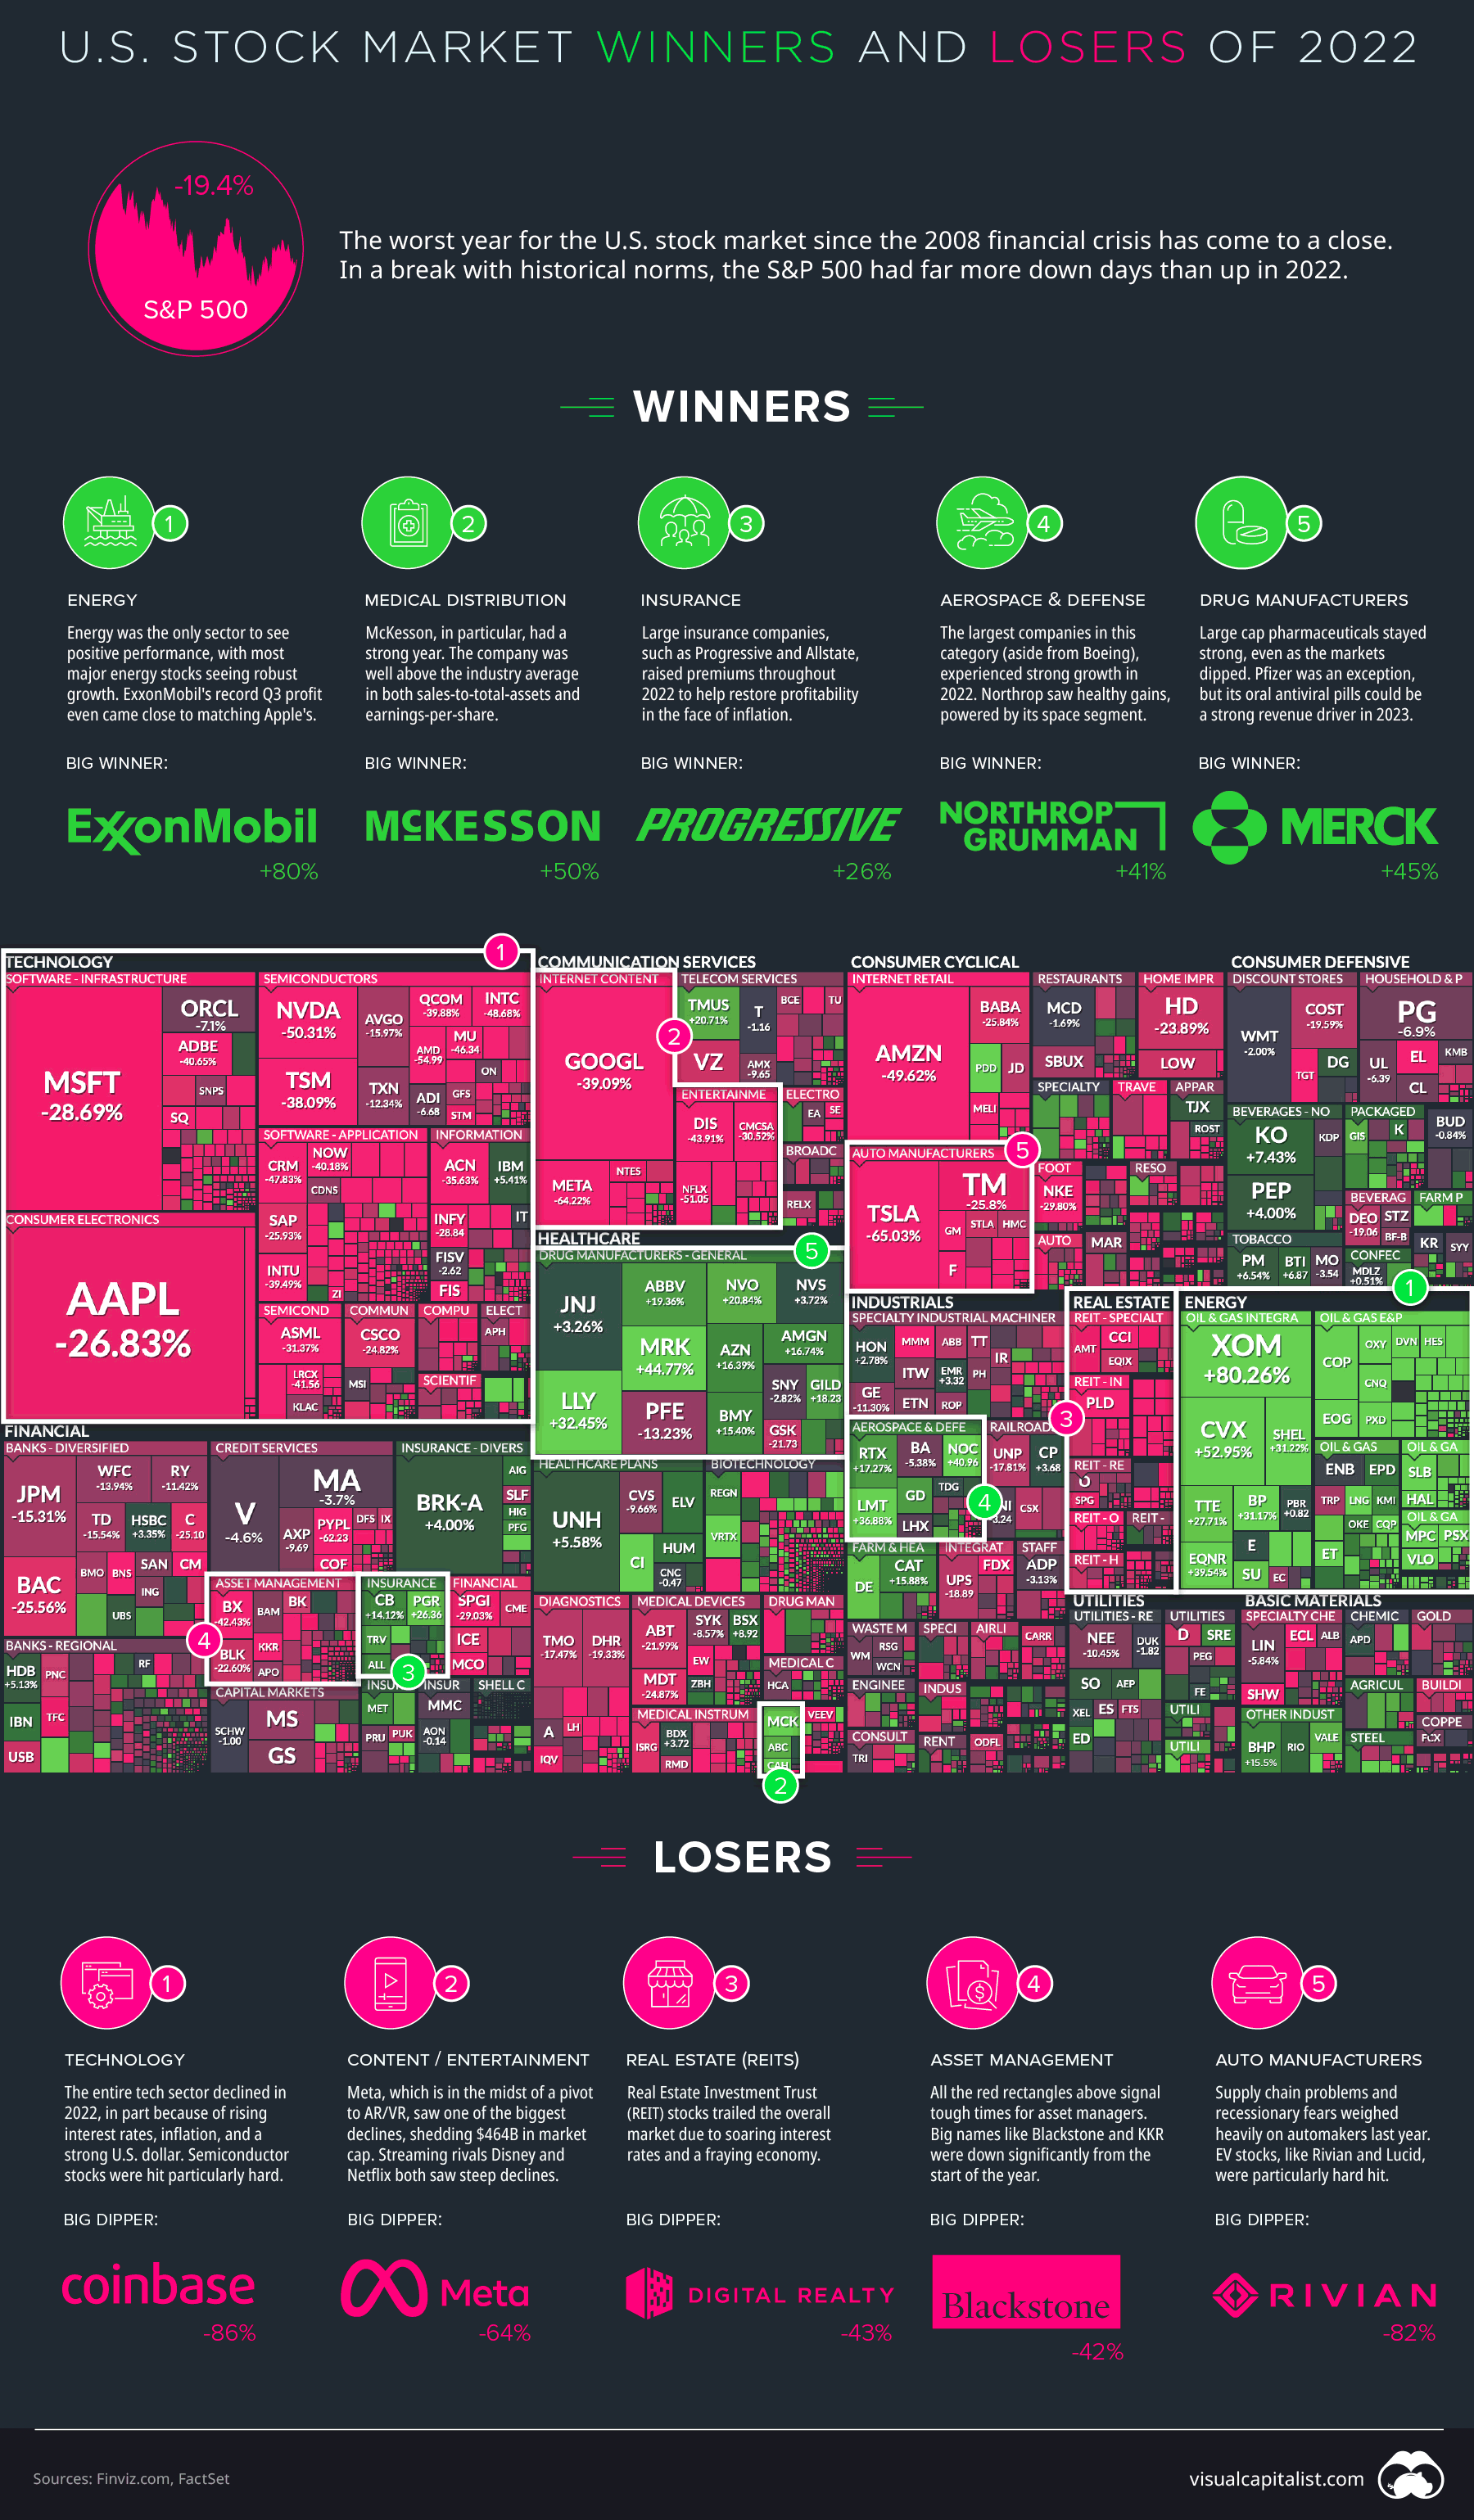 Infographic showing stock market winners and losers in 2022